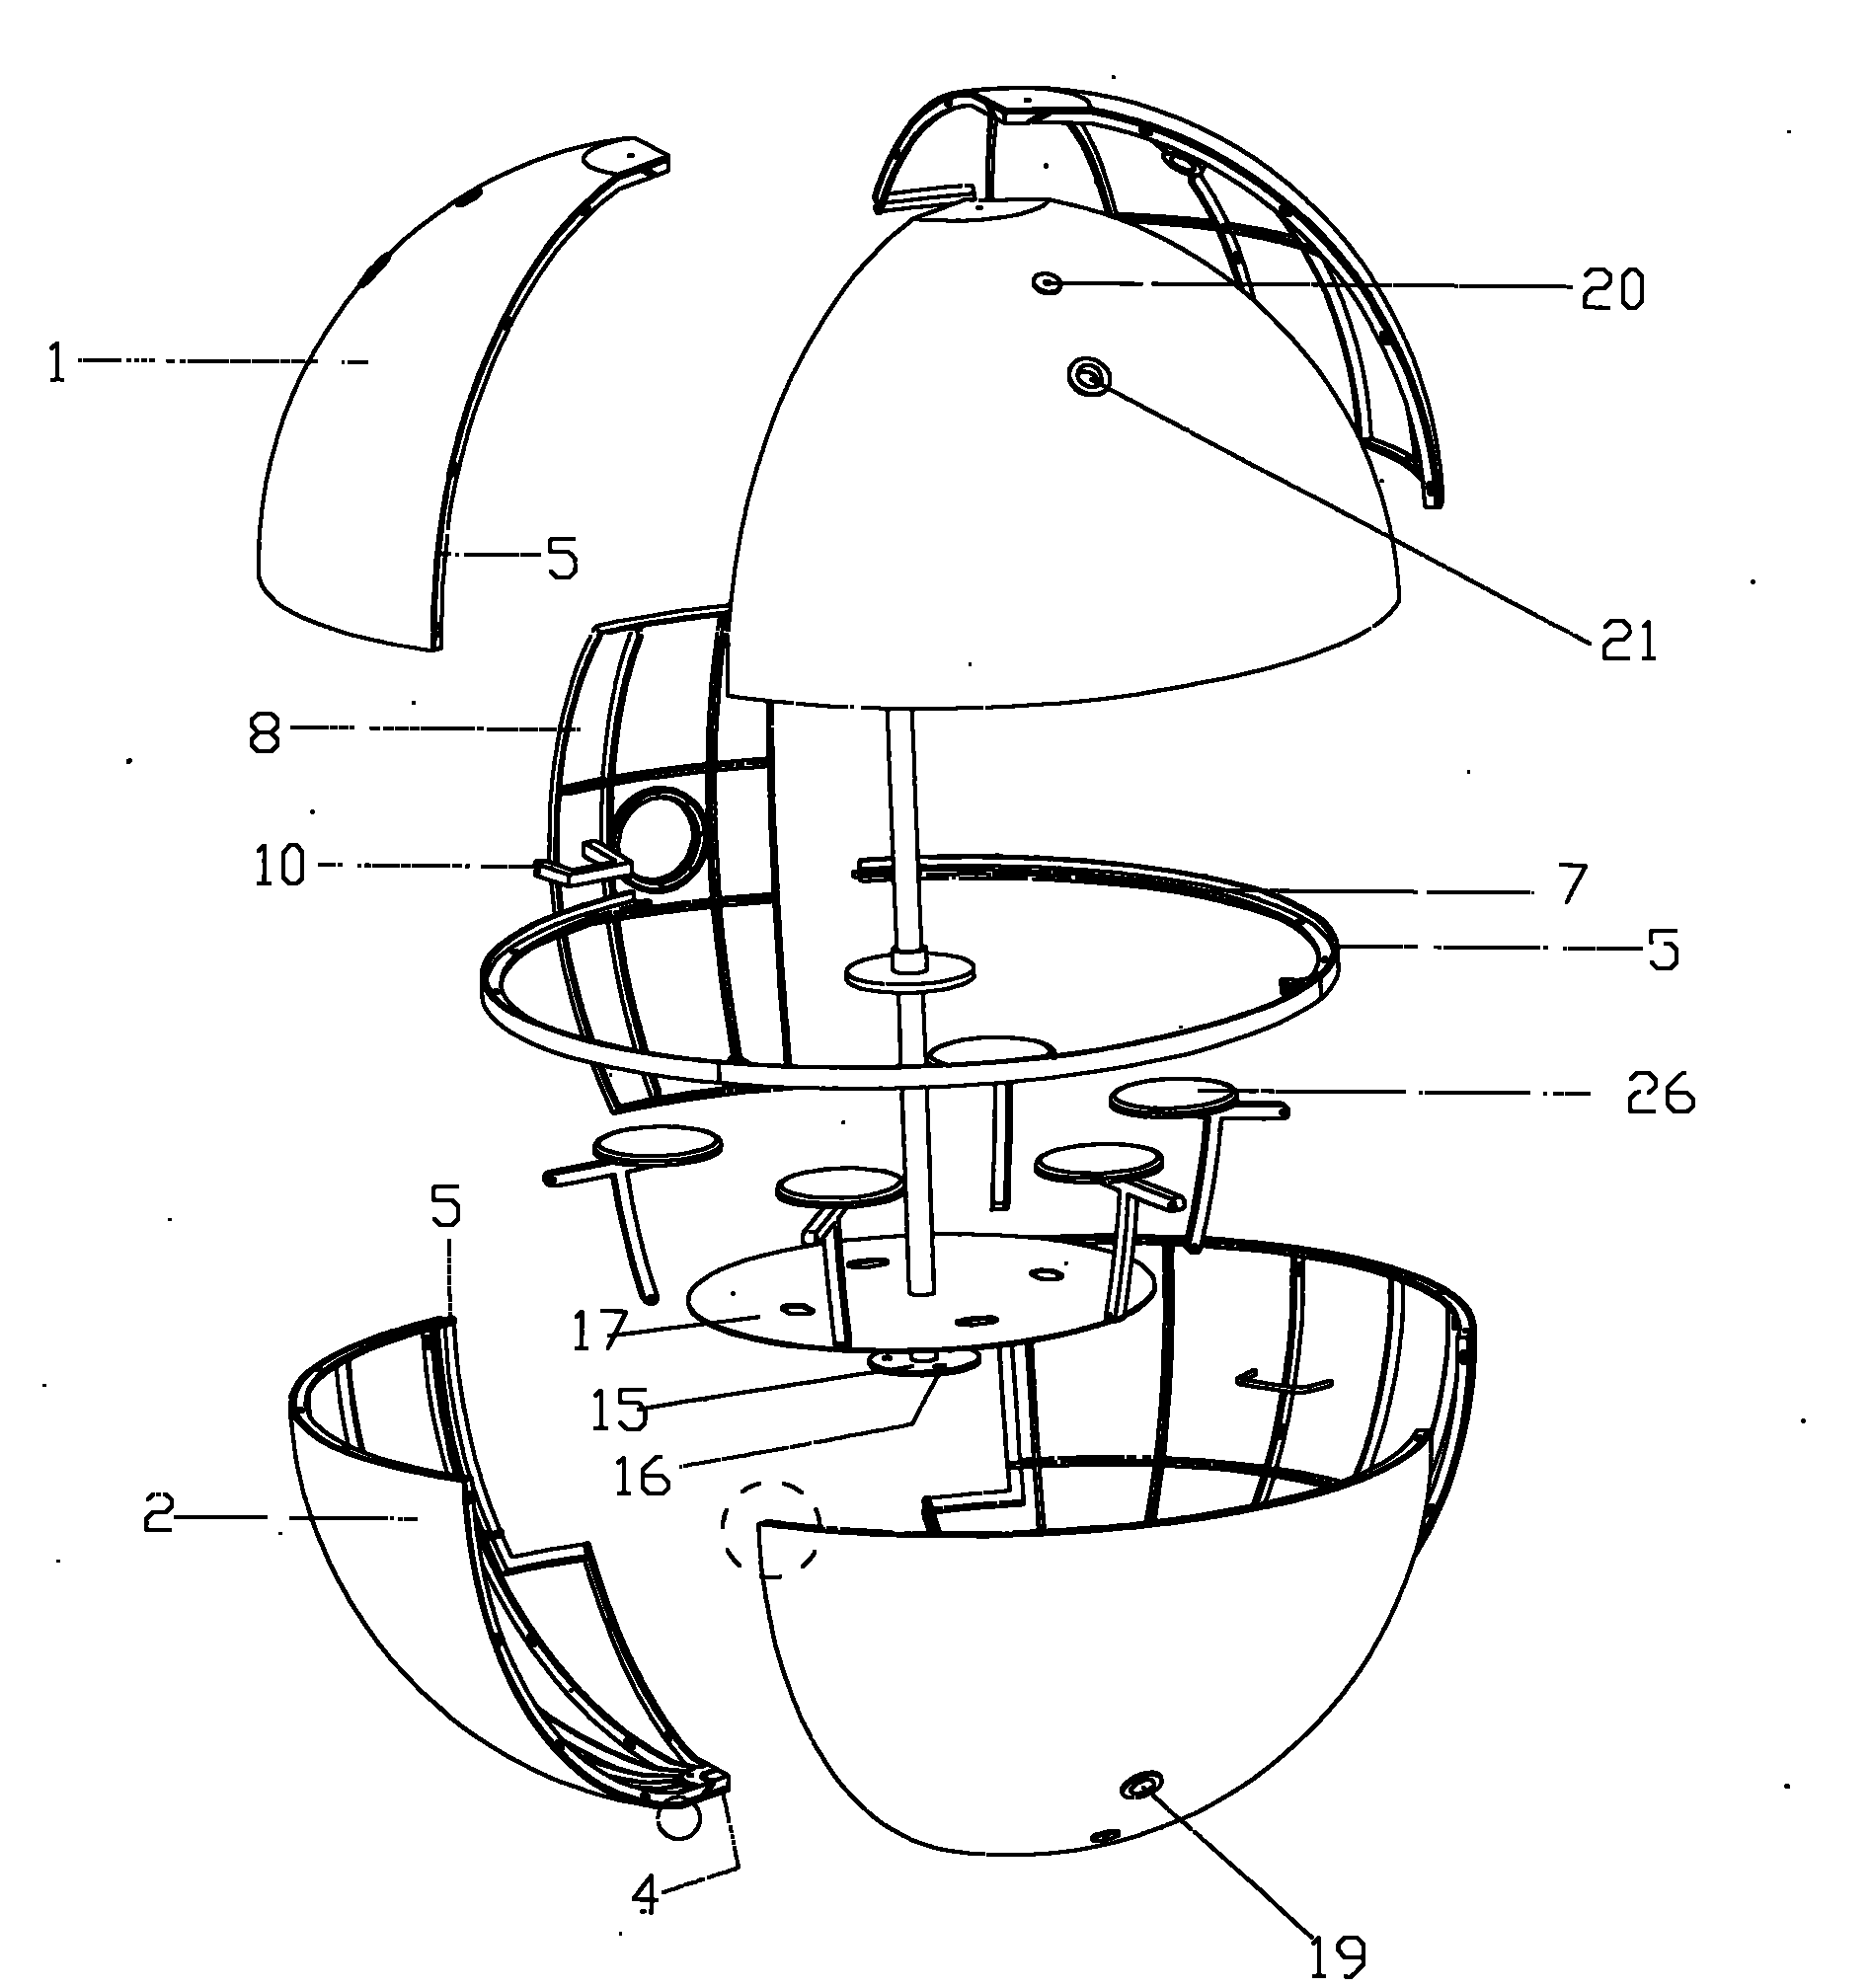 Closed type detachable active protected rescue capsule